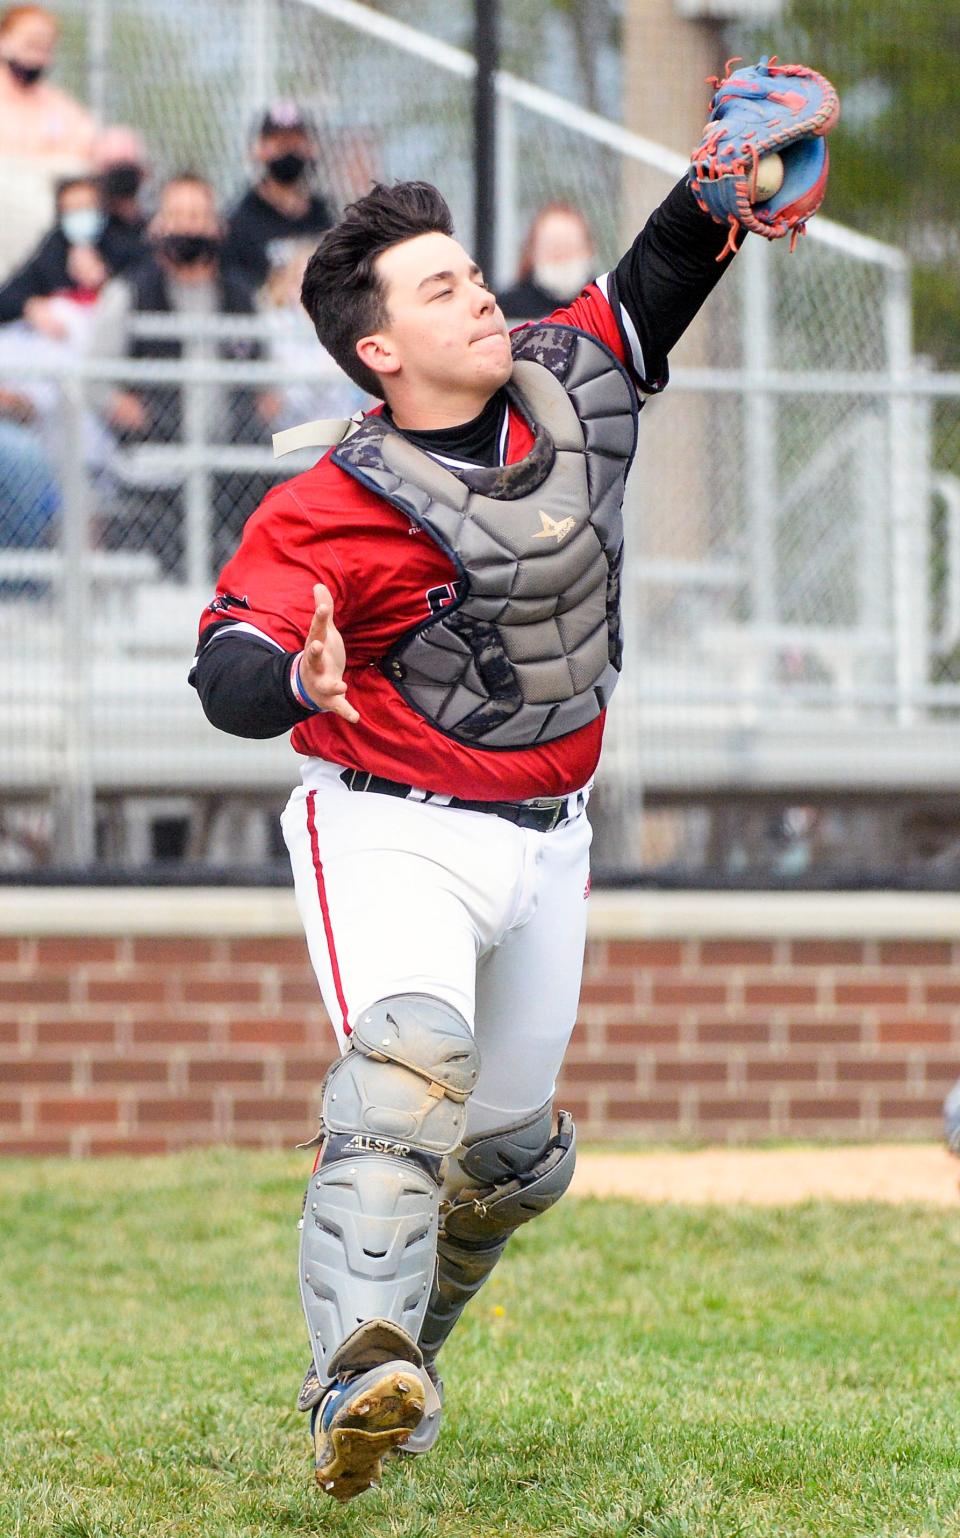 Edgewood catcher Brayden Ault catches a pop-up for an out during a game against Bloomington South in Ellettsville during the 2021 season.